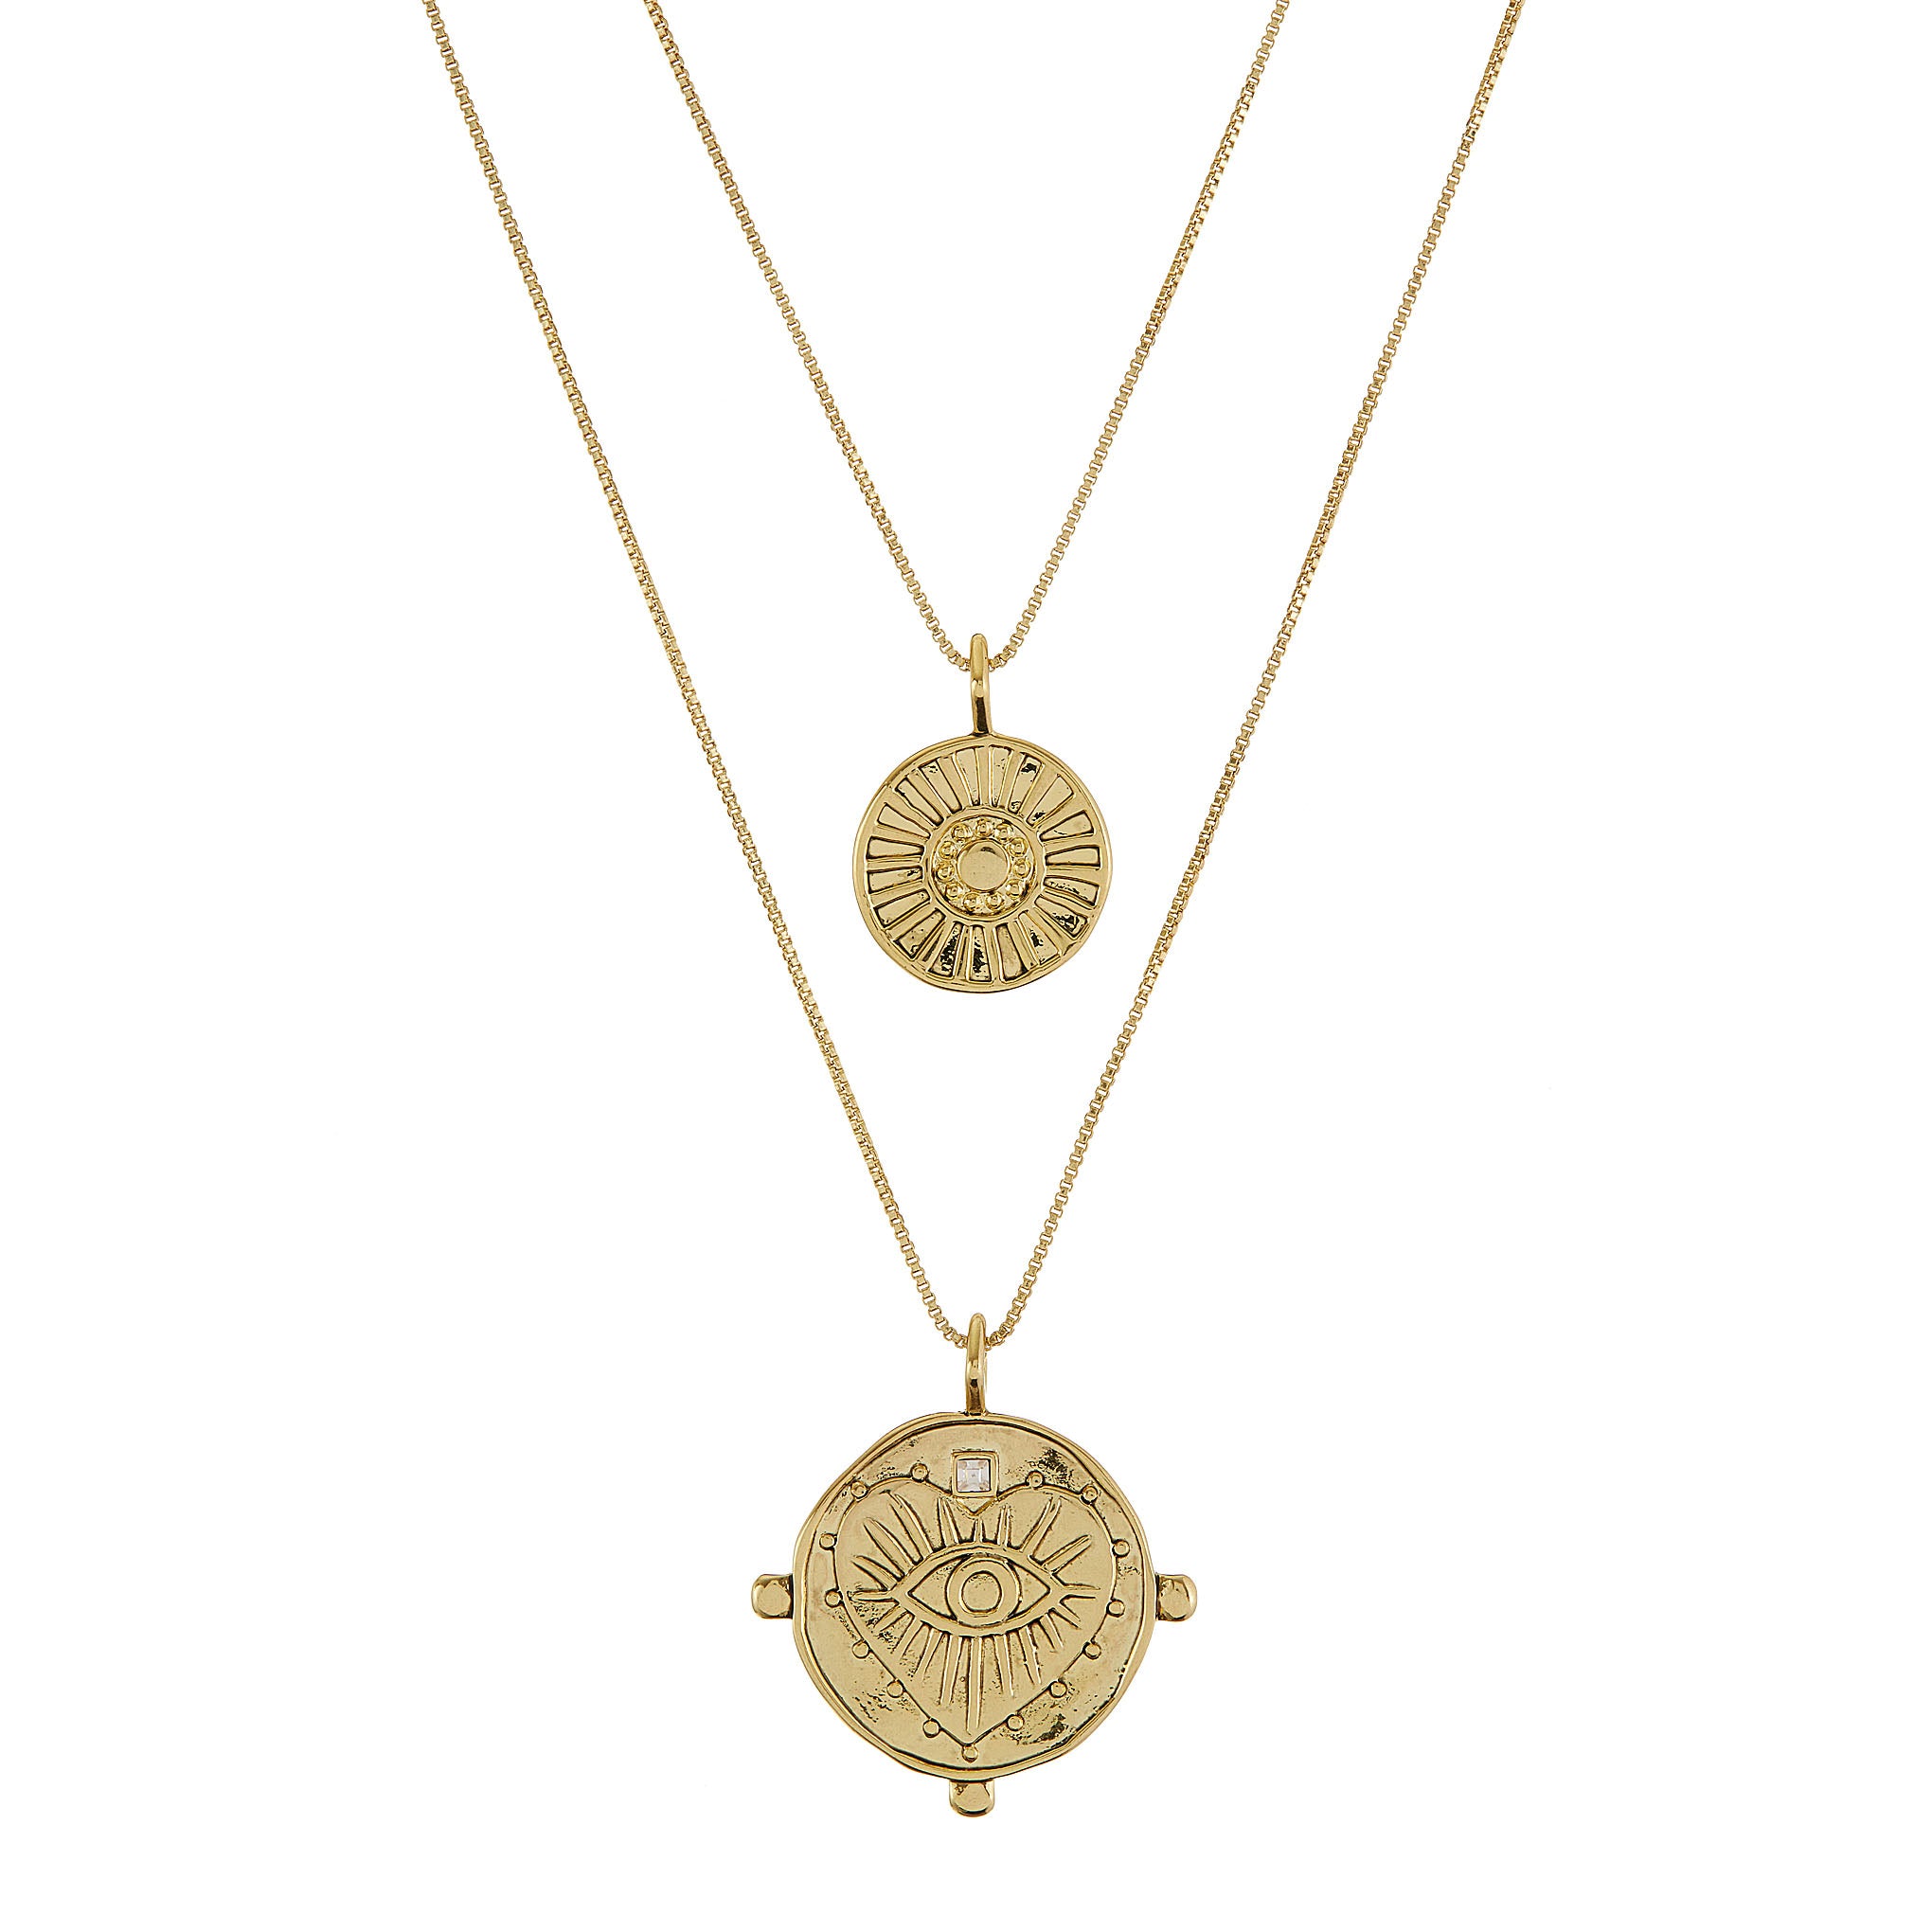 Luv Aj Evil Eye Double Coin Pendant Necklace Set in Crystal and 14k Antique Gold